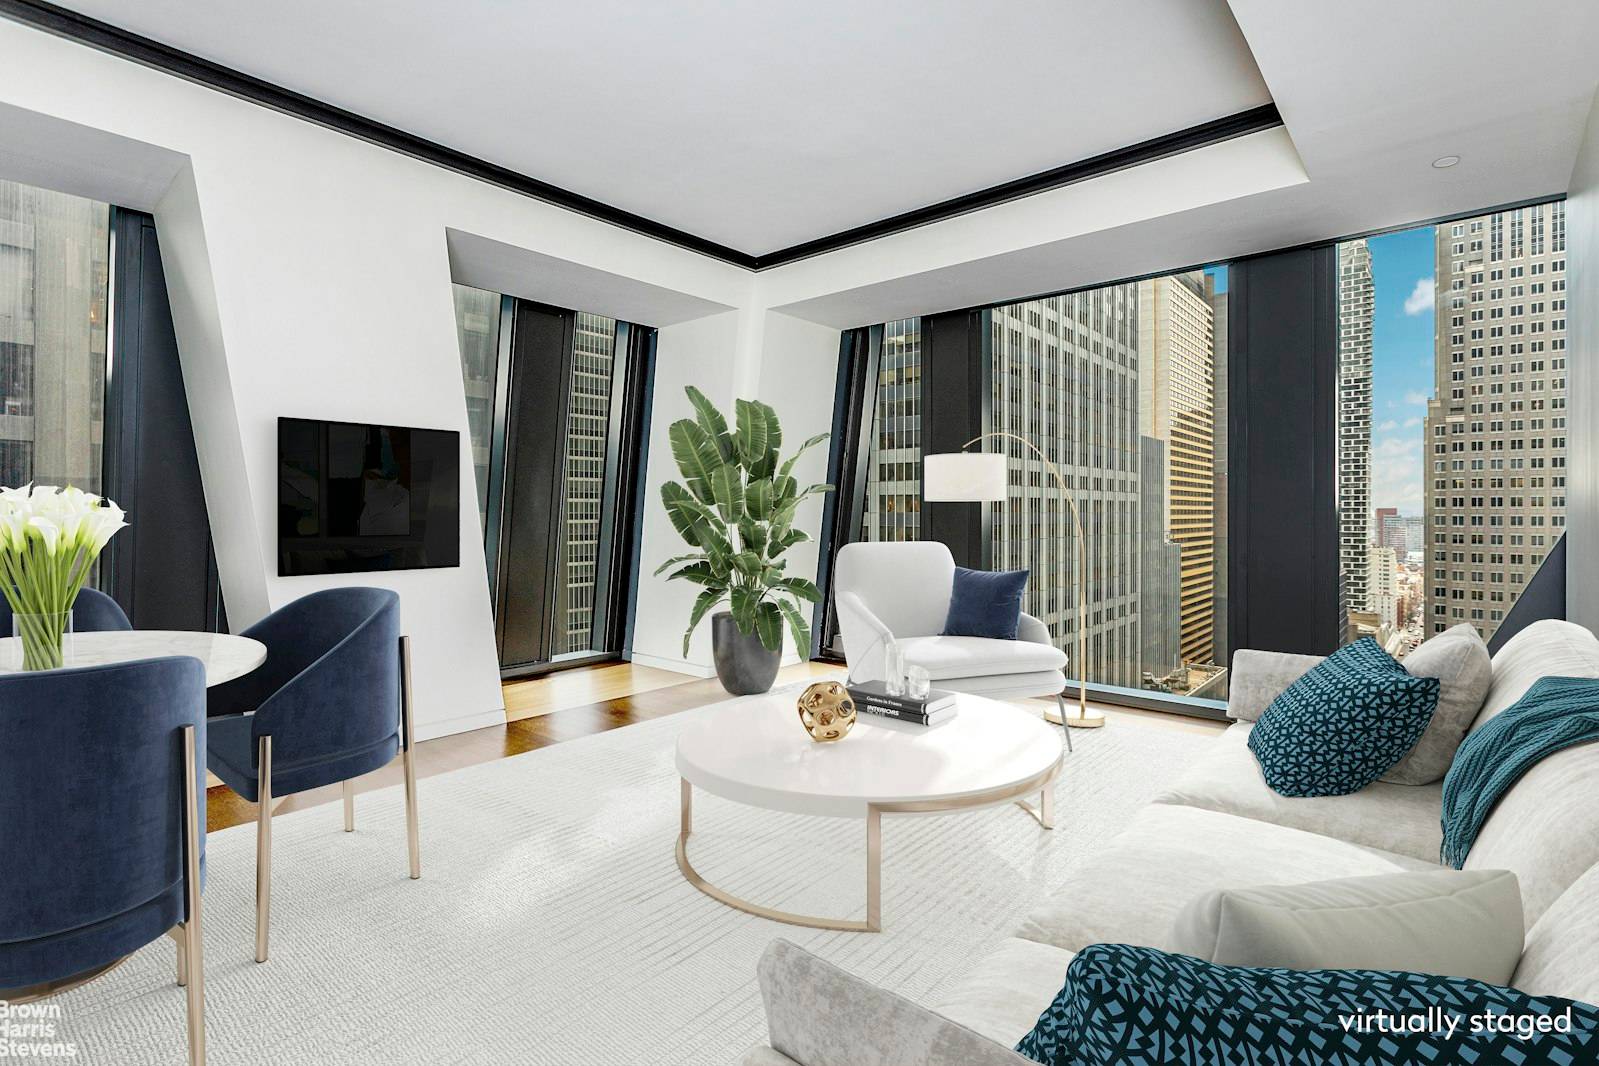 Large corner one bedroom residence in one of the most architecturally significant addition to the New York skyline designed by world reknowned Pritzker Prize winning architect Jean Nouvel.